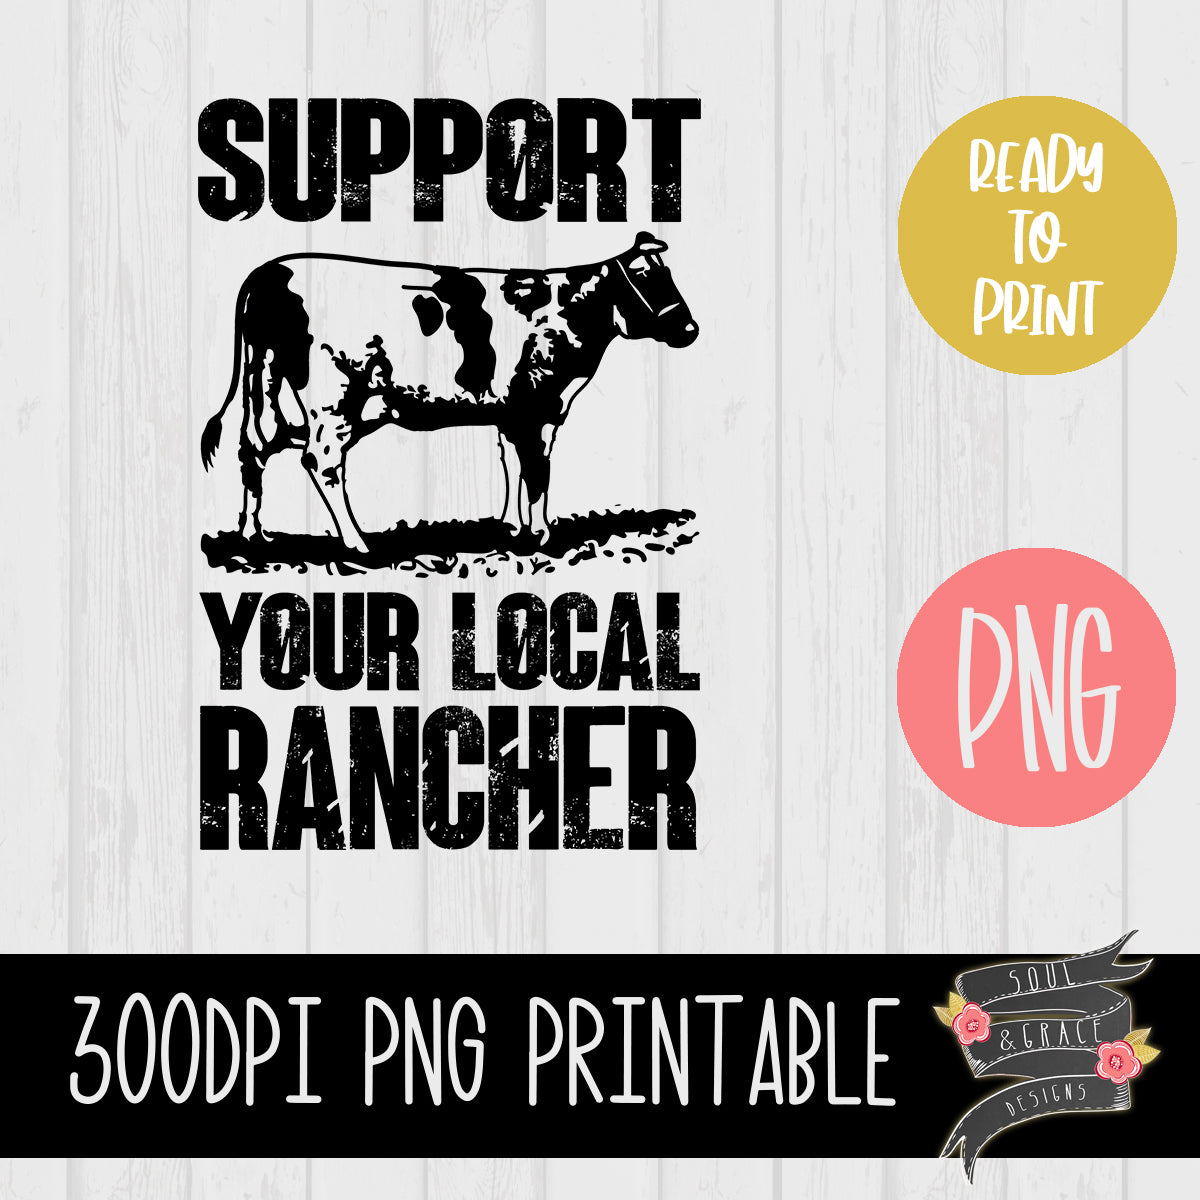 Support Your Local Rancher